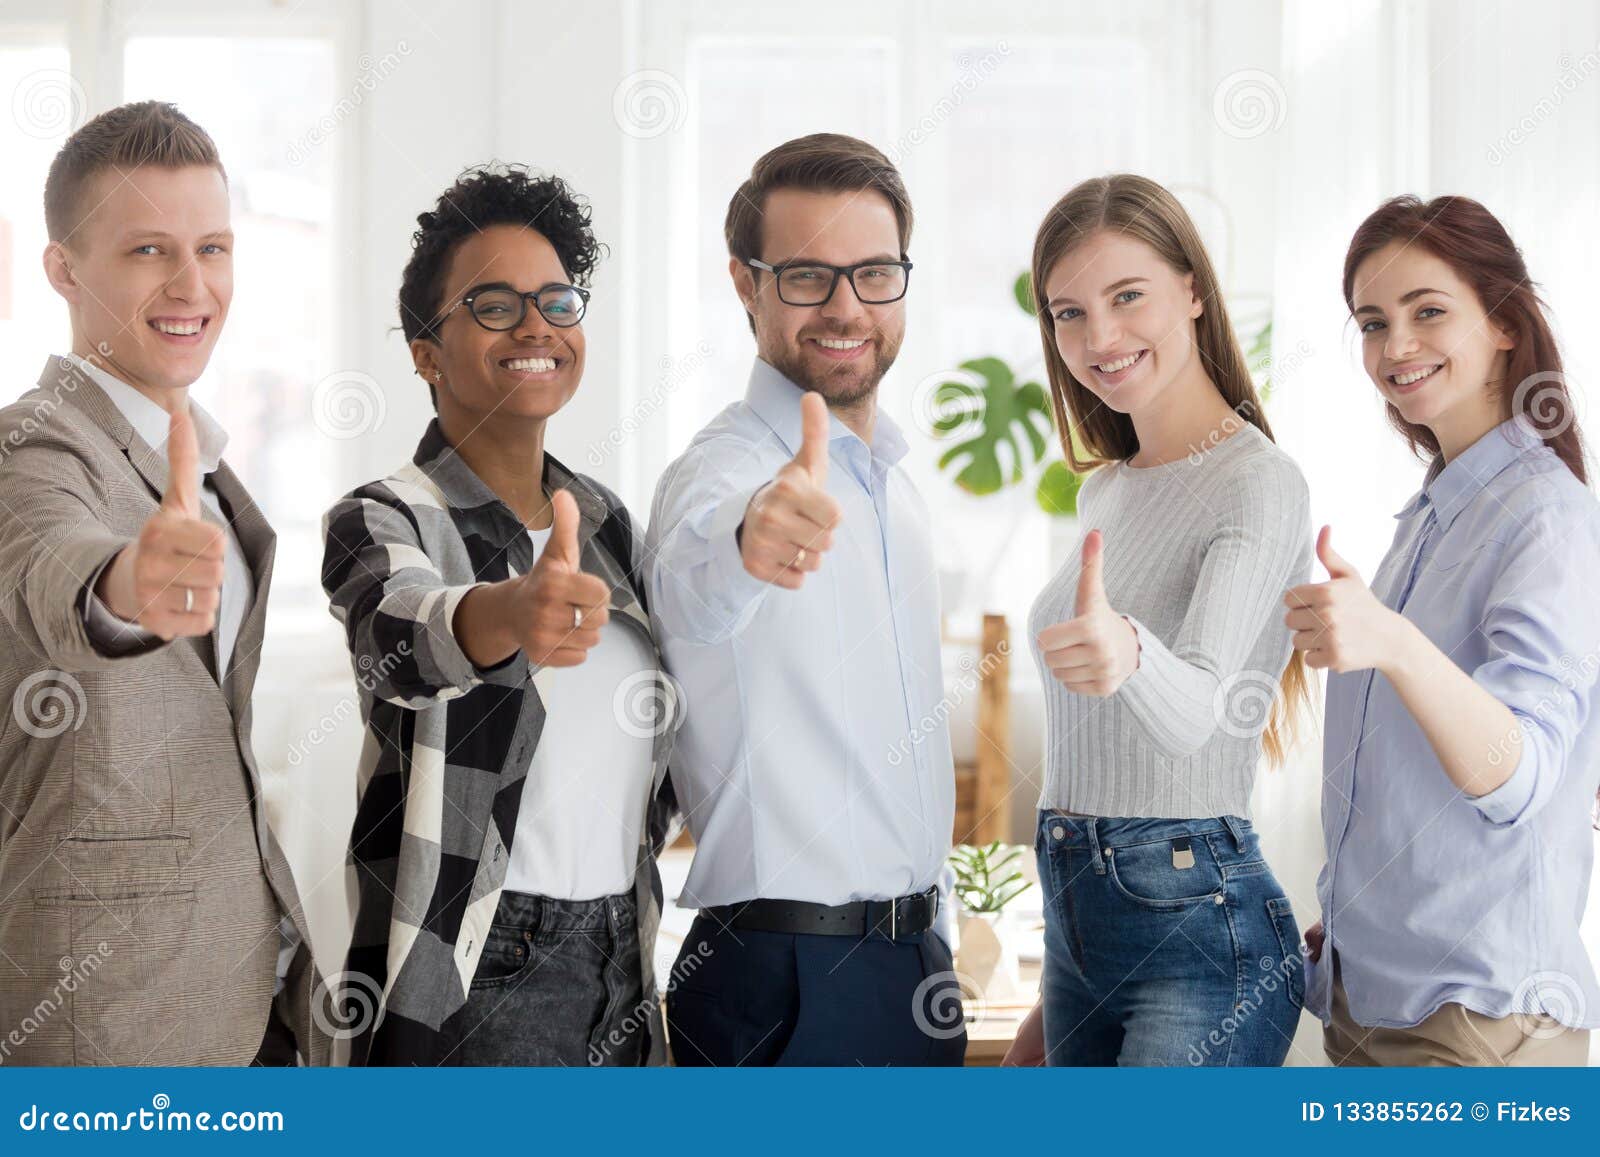 happy millennial people standing showing thumbs up